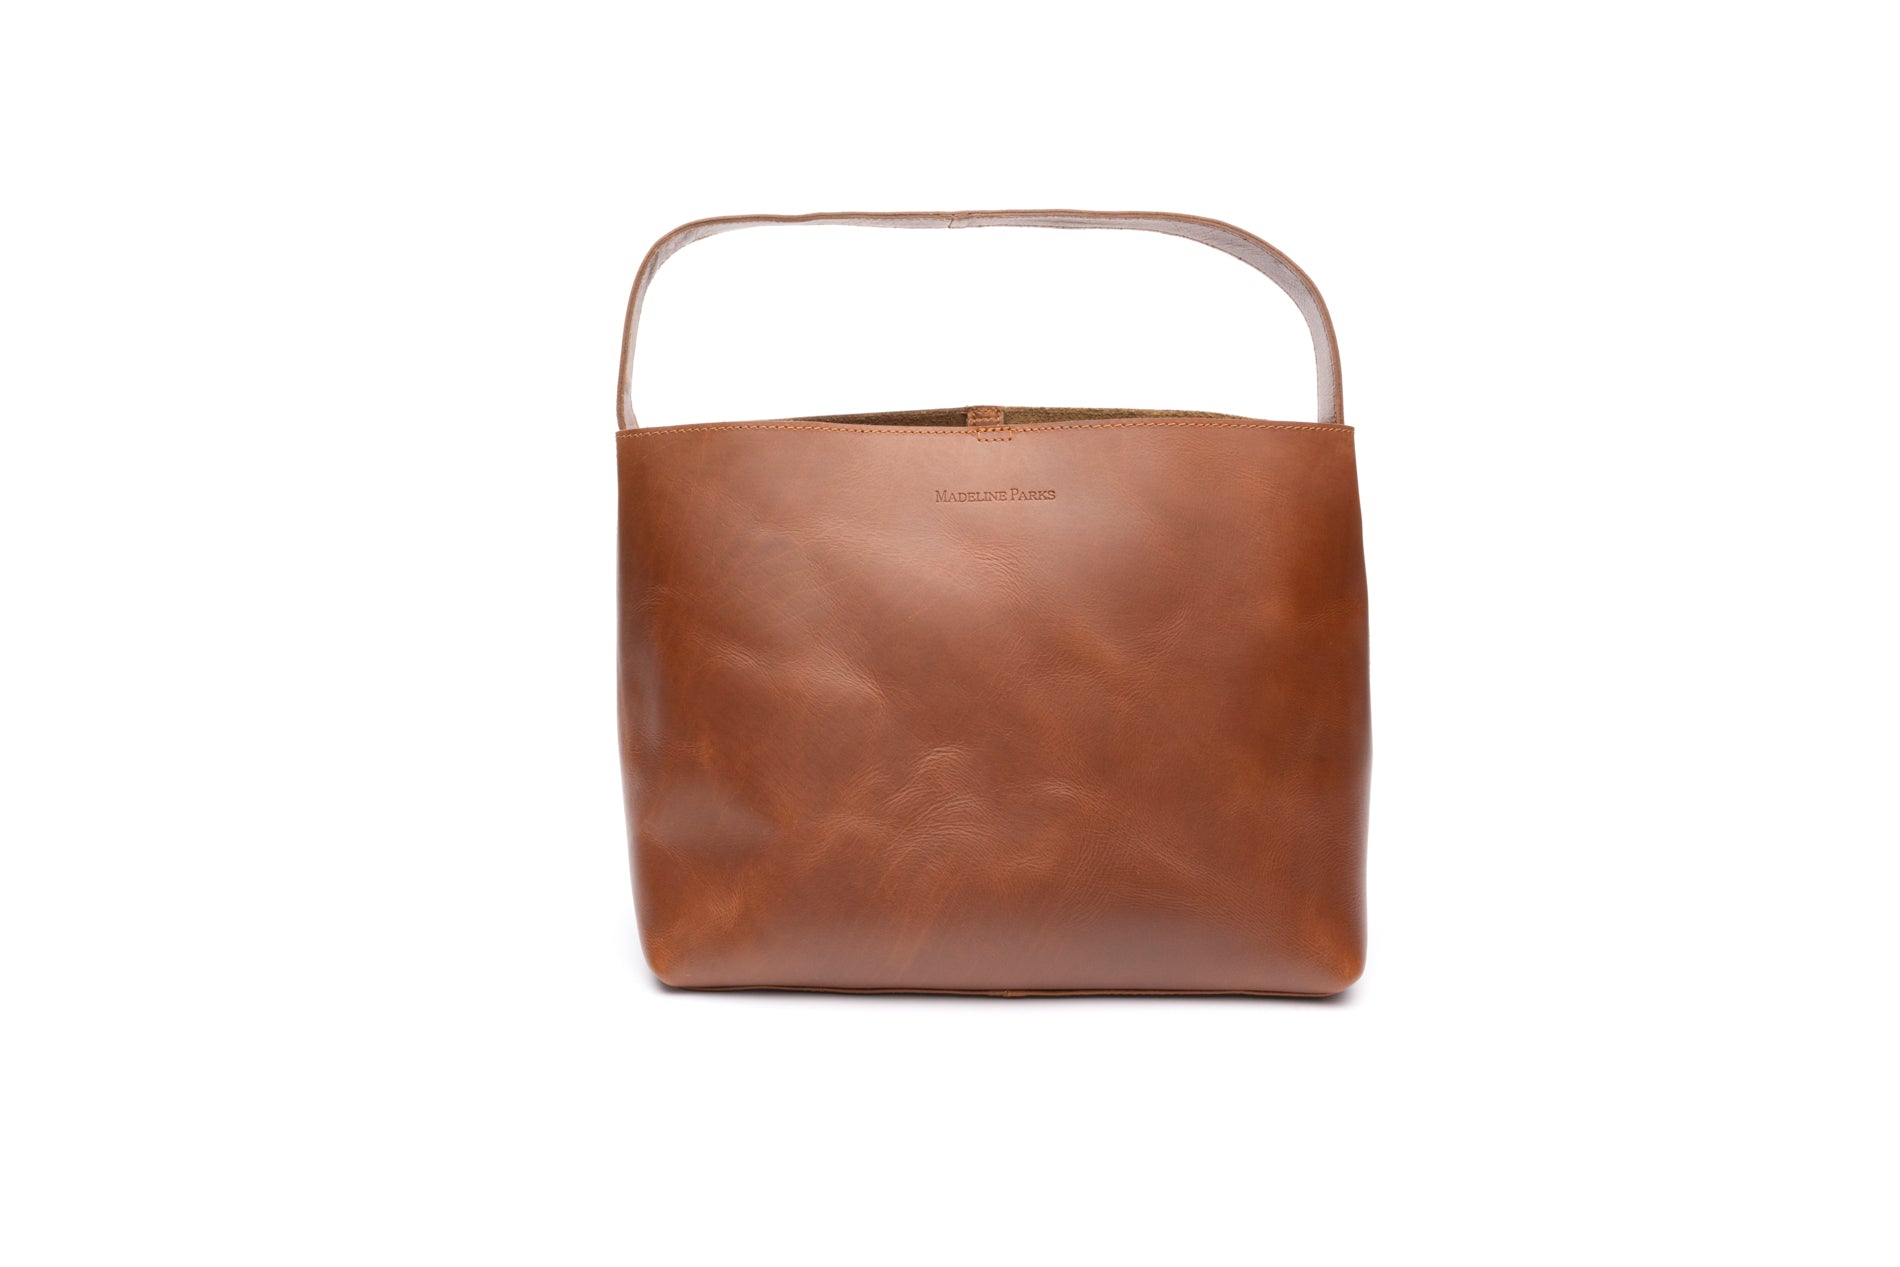 Stylish fashionable brown leather tote that is fair trade ethically produced